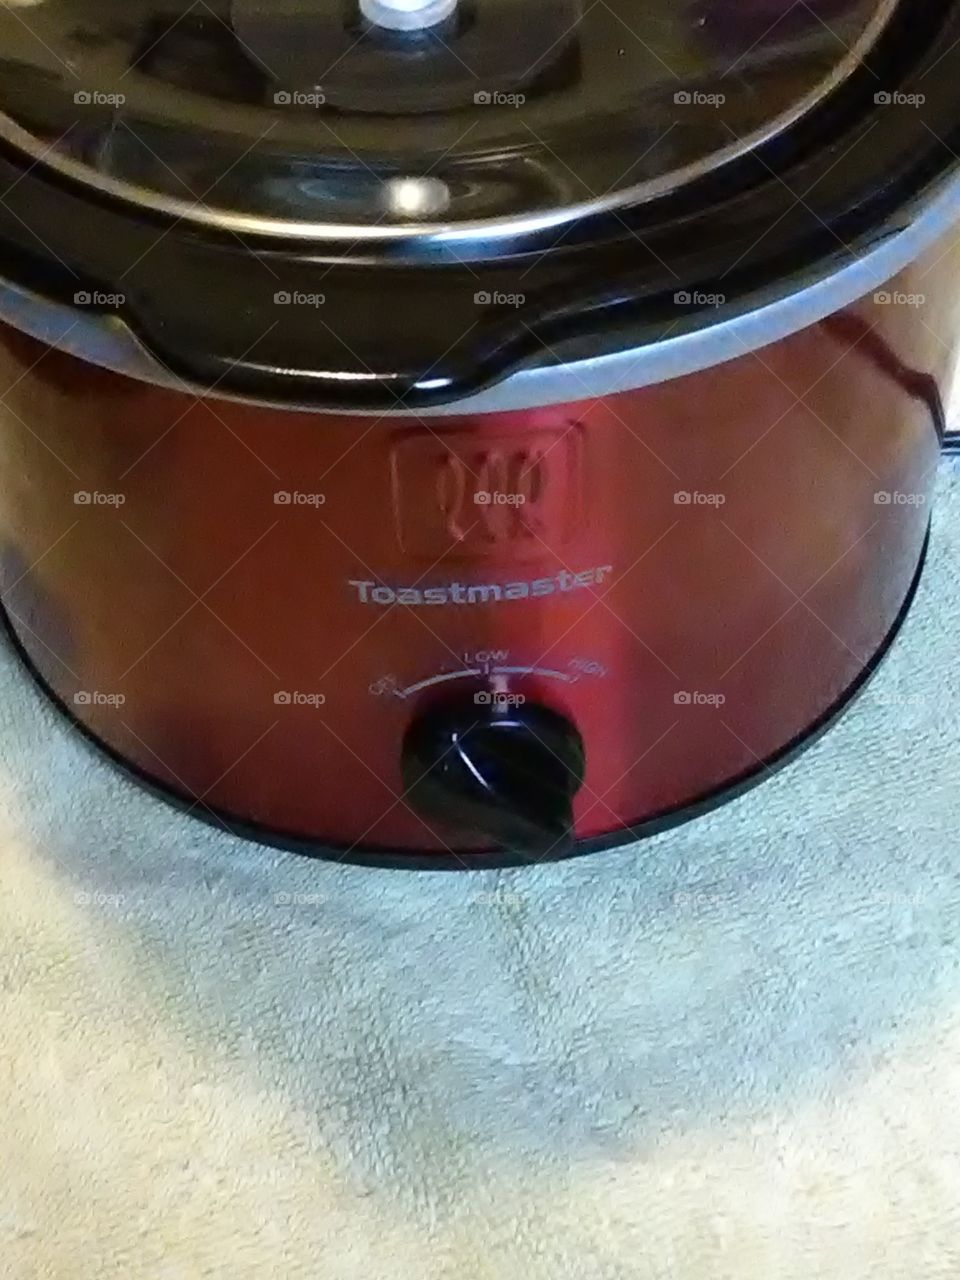 a small crock pot vintage included in the album